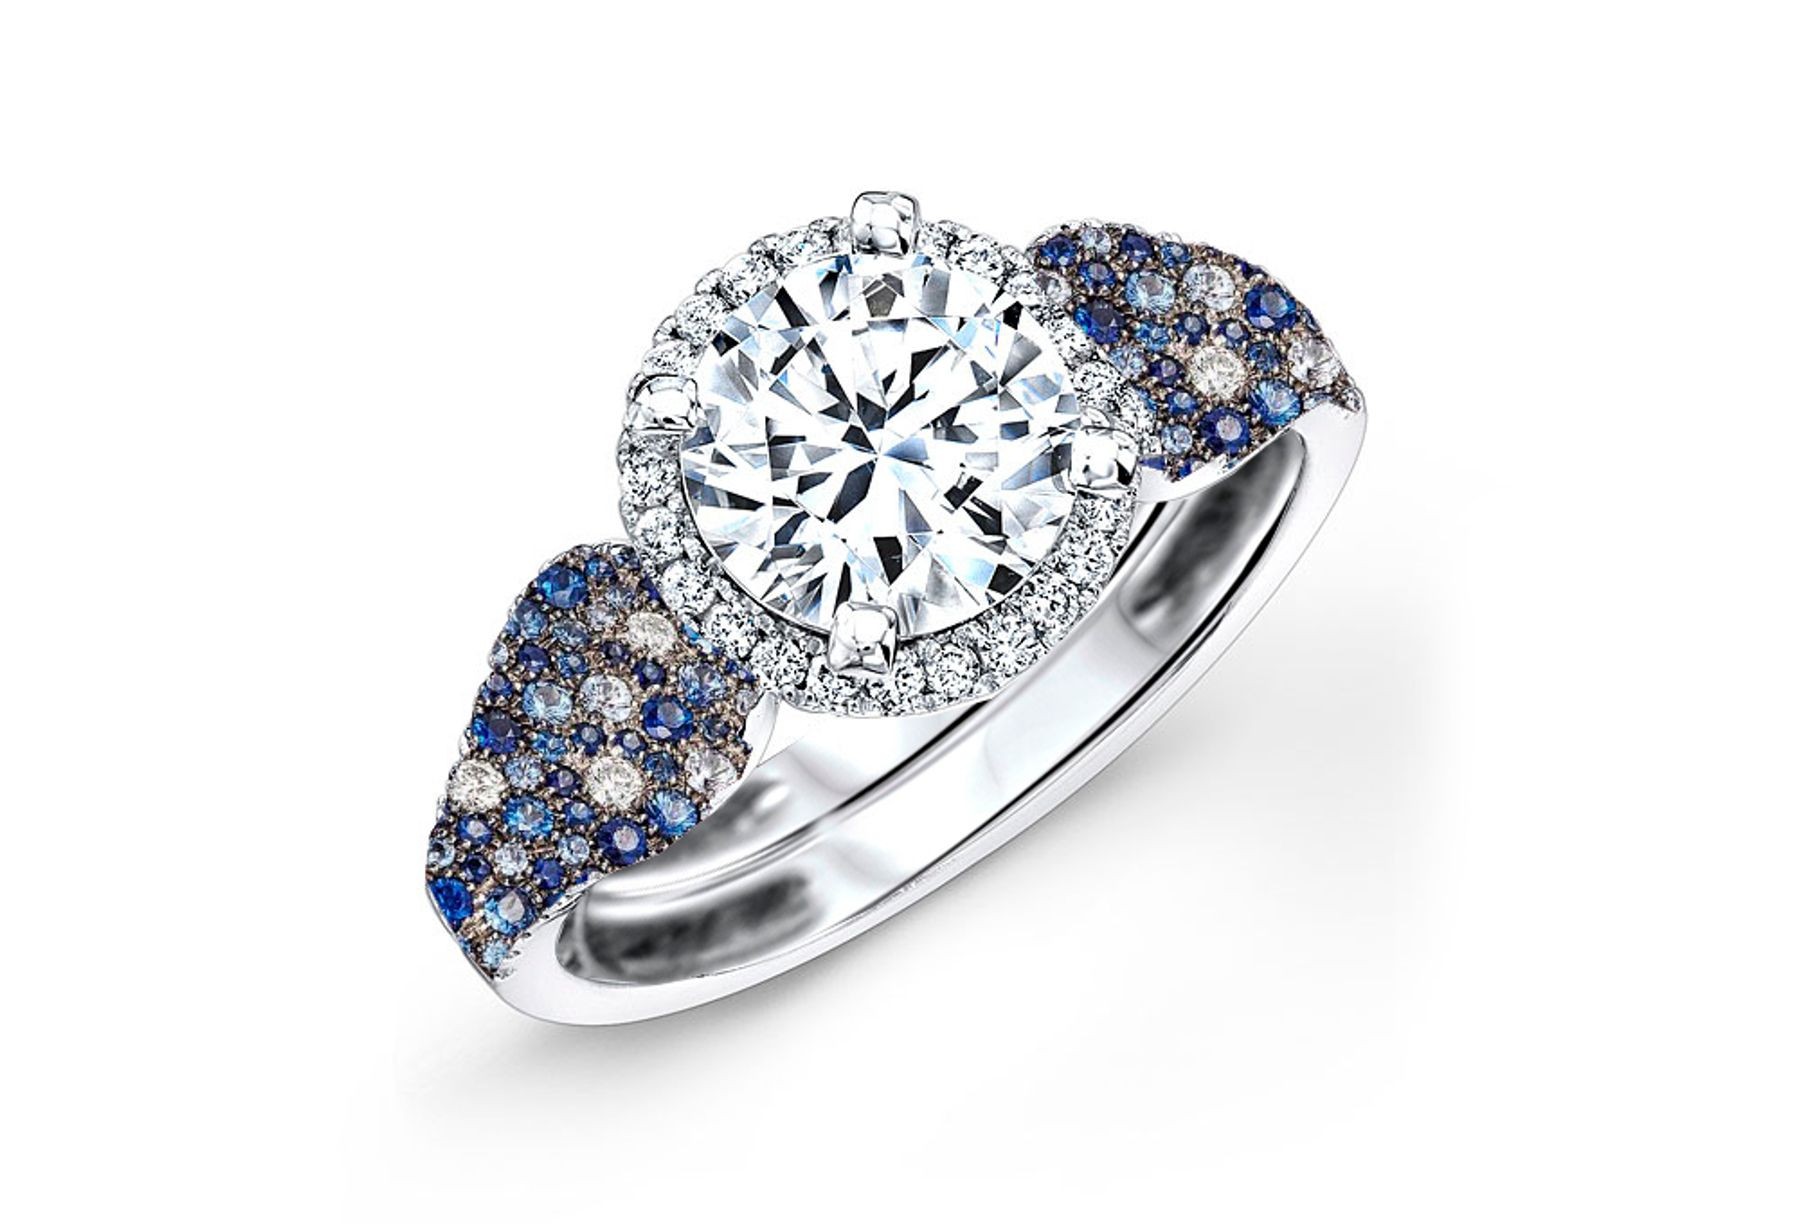 Made To Order Rings Featuring Delicate French Halo Pave Diamonds & Vivid Blue Sapphires